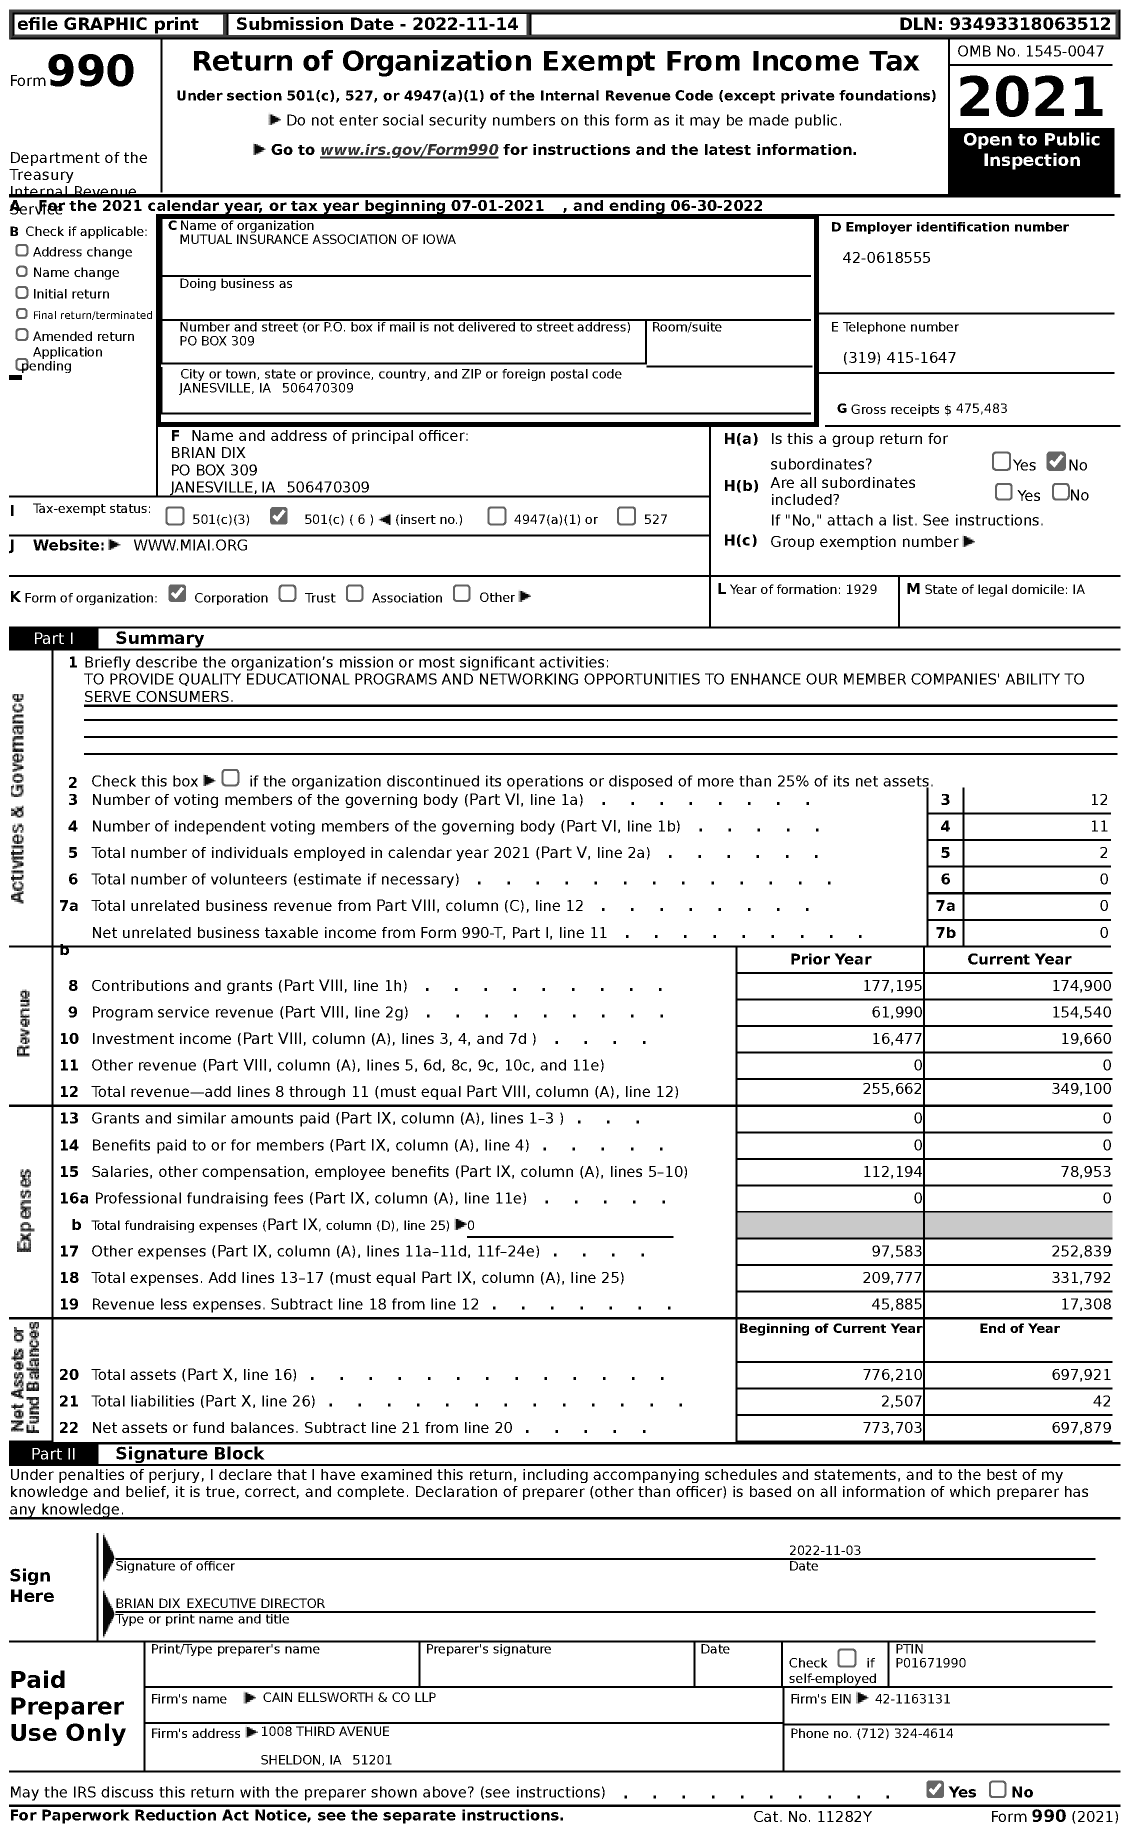 Image of first page of 2021 Form 990 for Mutual Insurance Association of Iowa